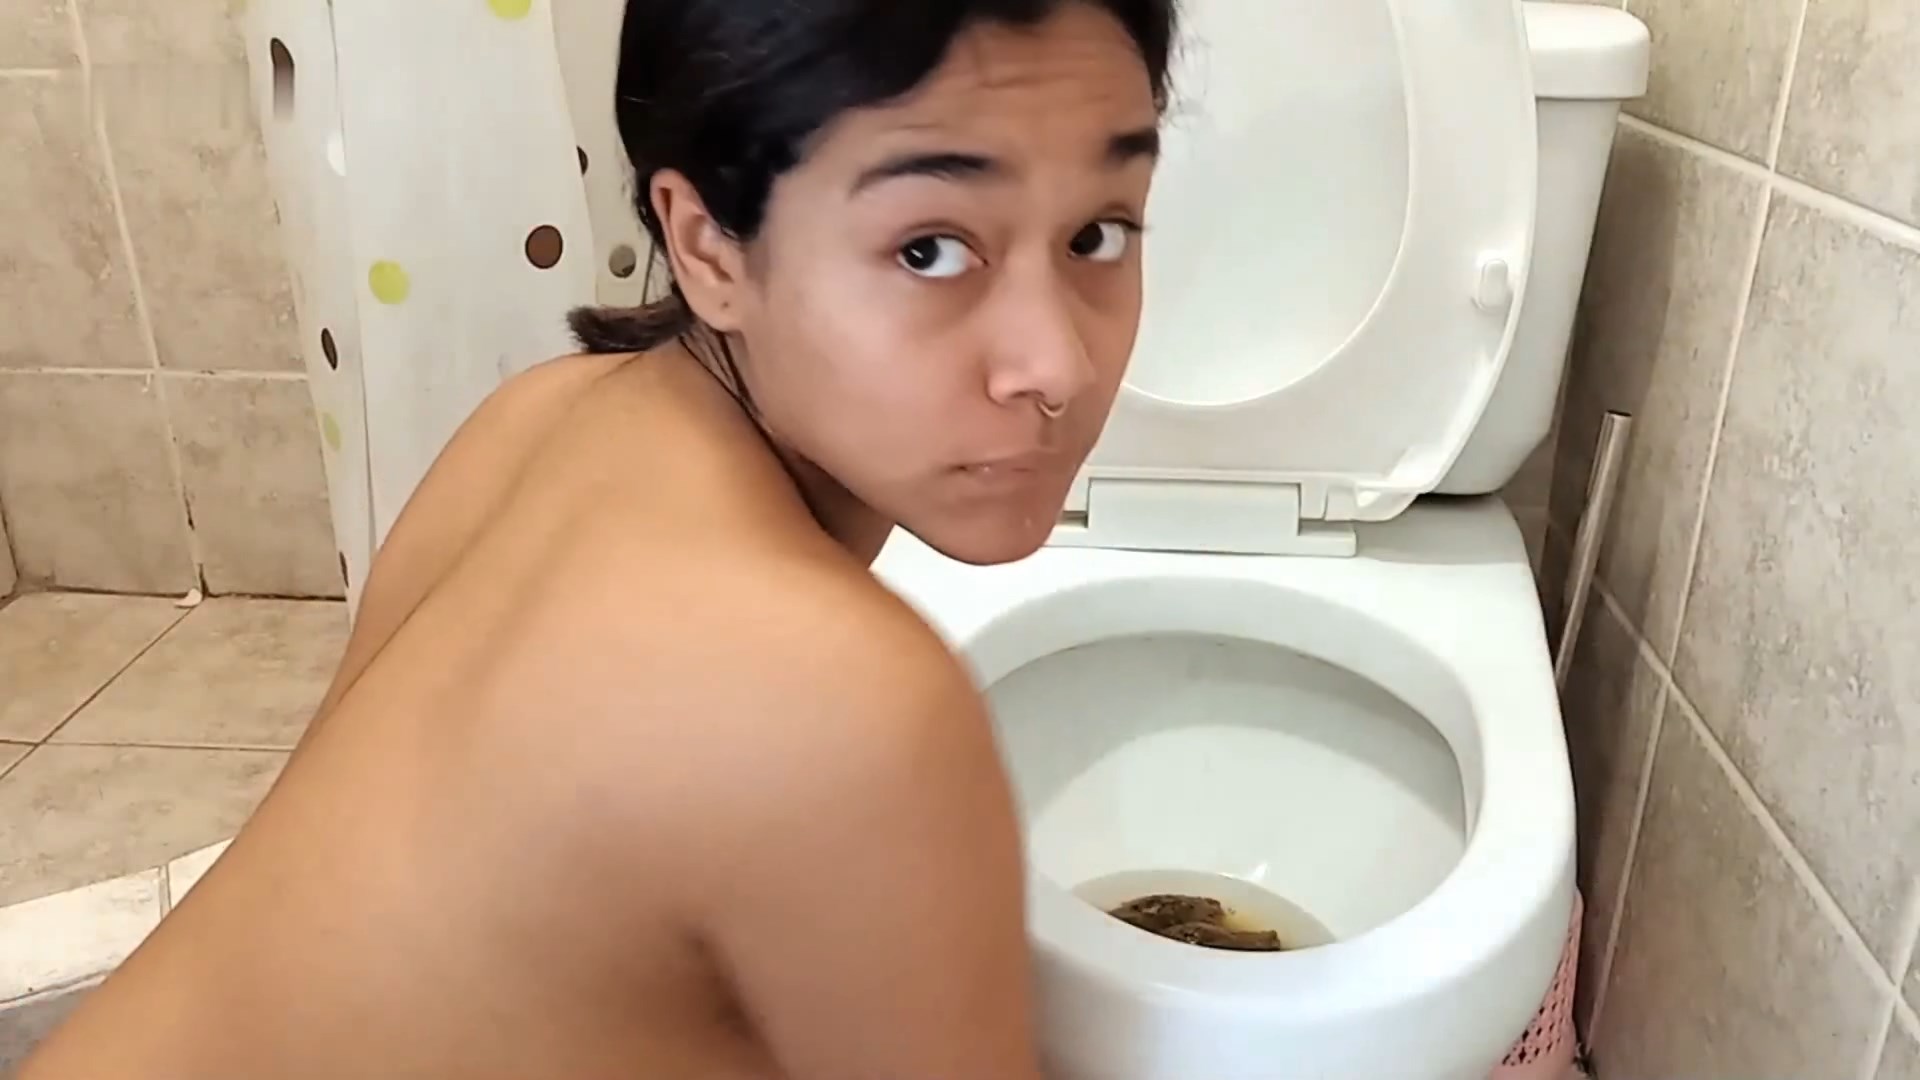 Toilet - Eating my dirty toilet, after pooing (Special scat porn request from our  premium user) $28.99 by Mirellabb from 11 - Extreme Scat Porn Site #1